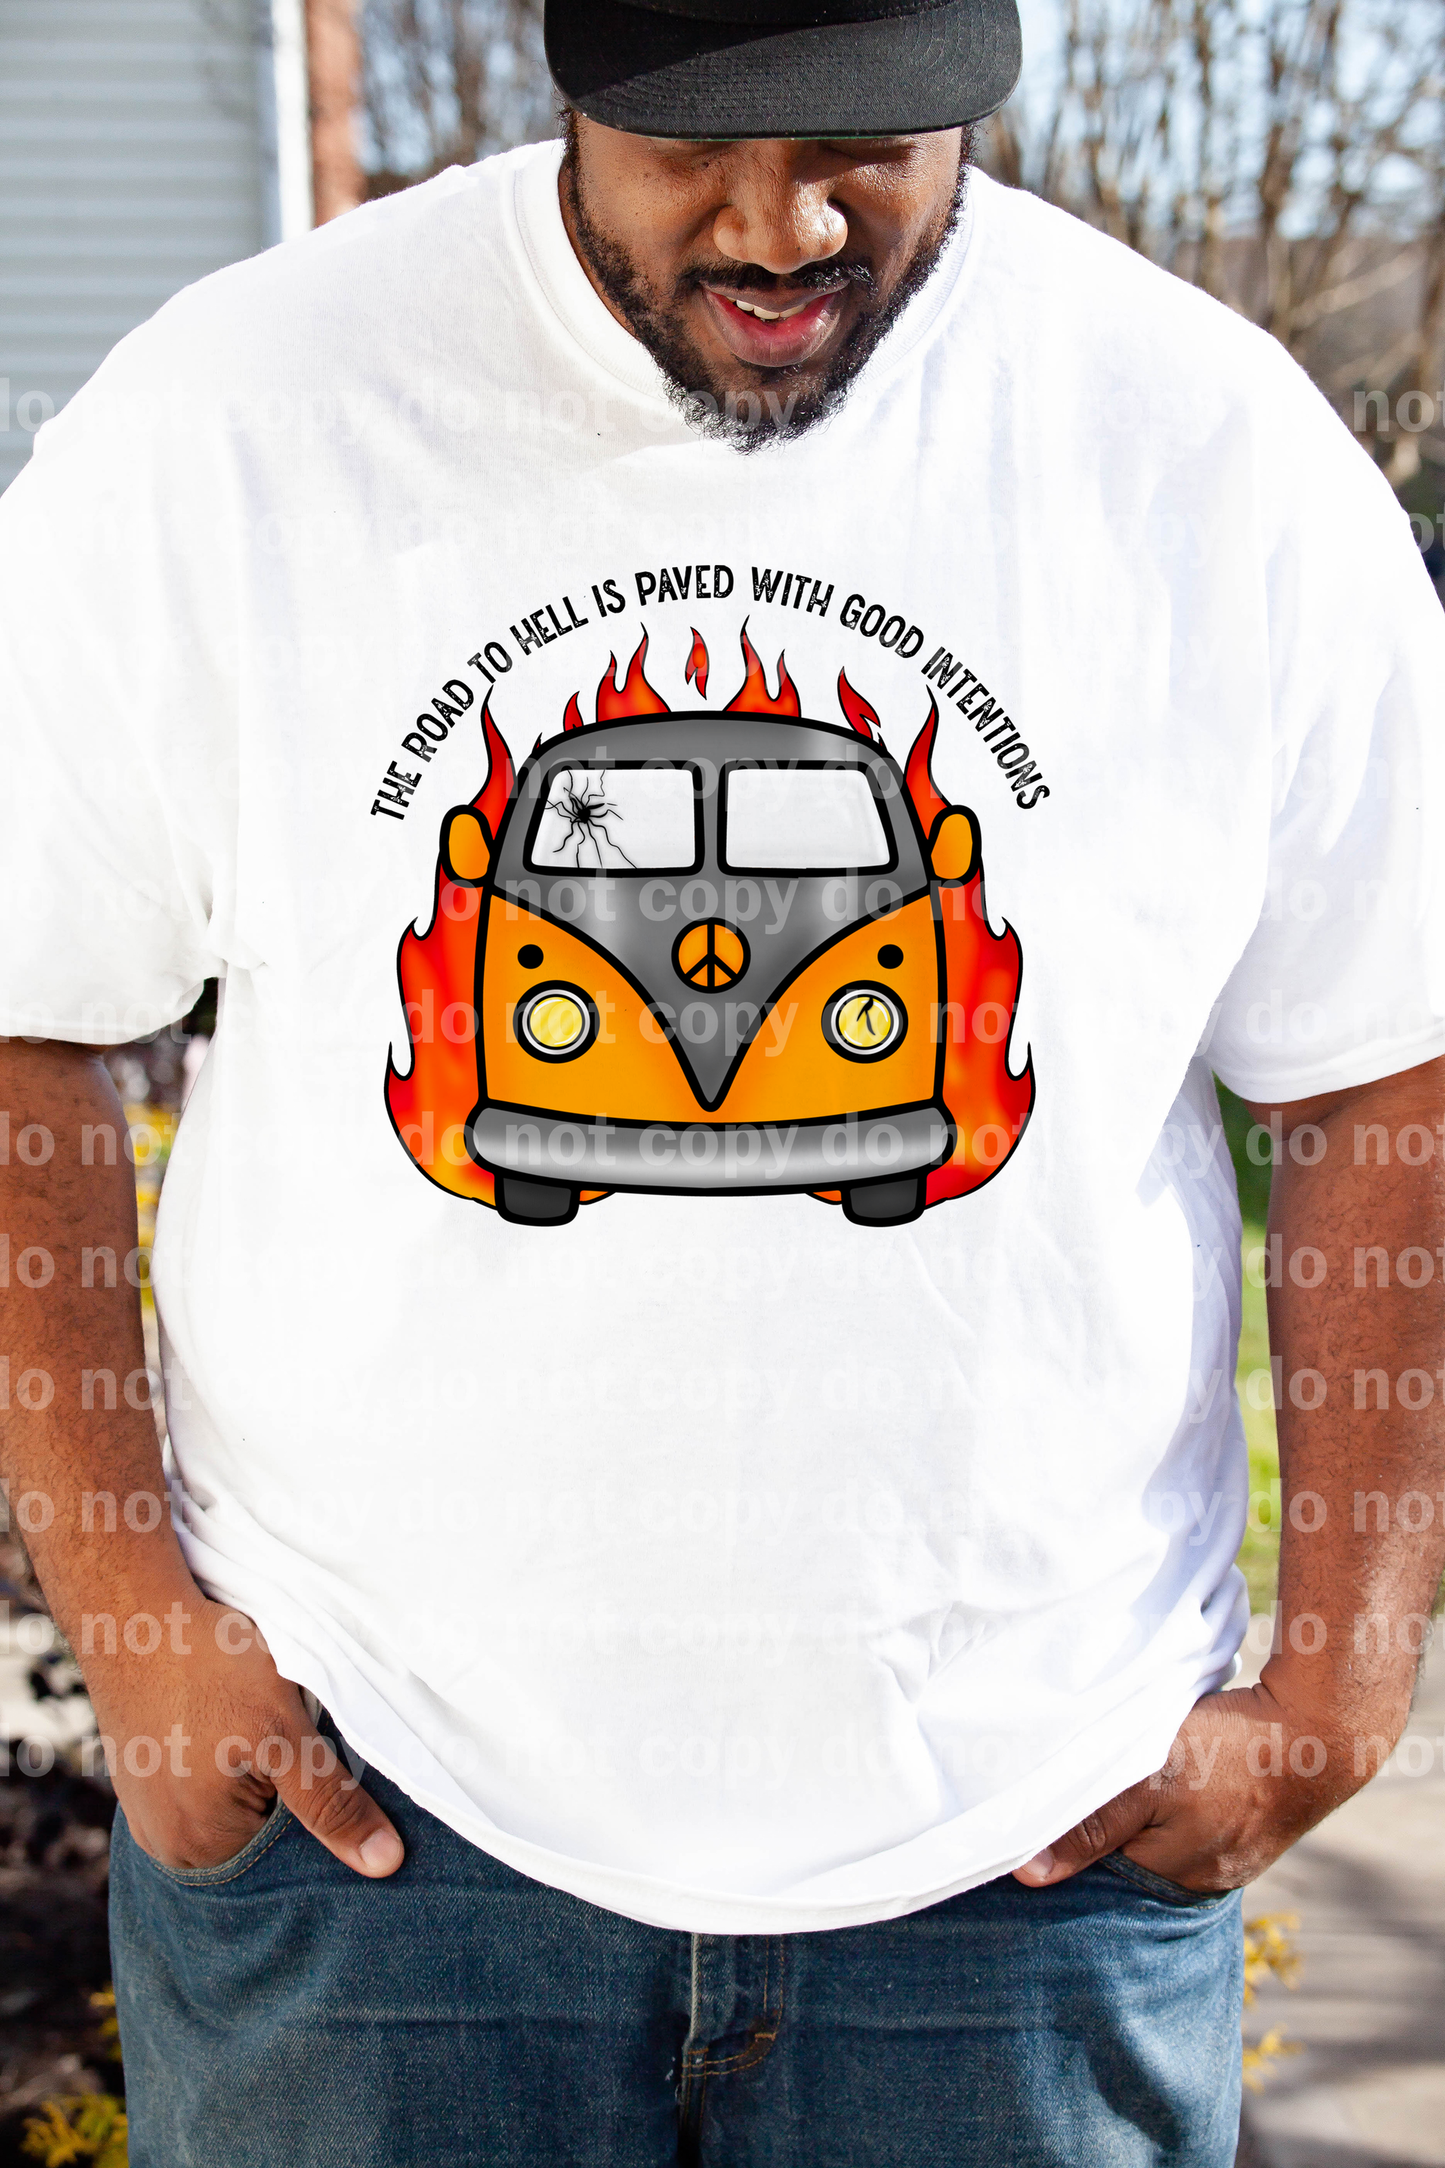 The Road To Hell Is Paved With Good Intentions Distressed Dream Print or Sublimation Print